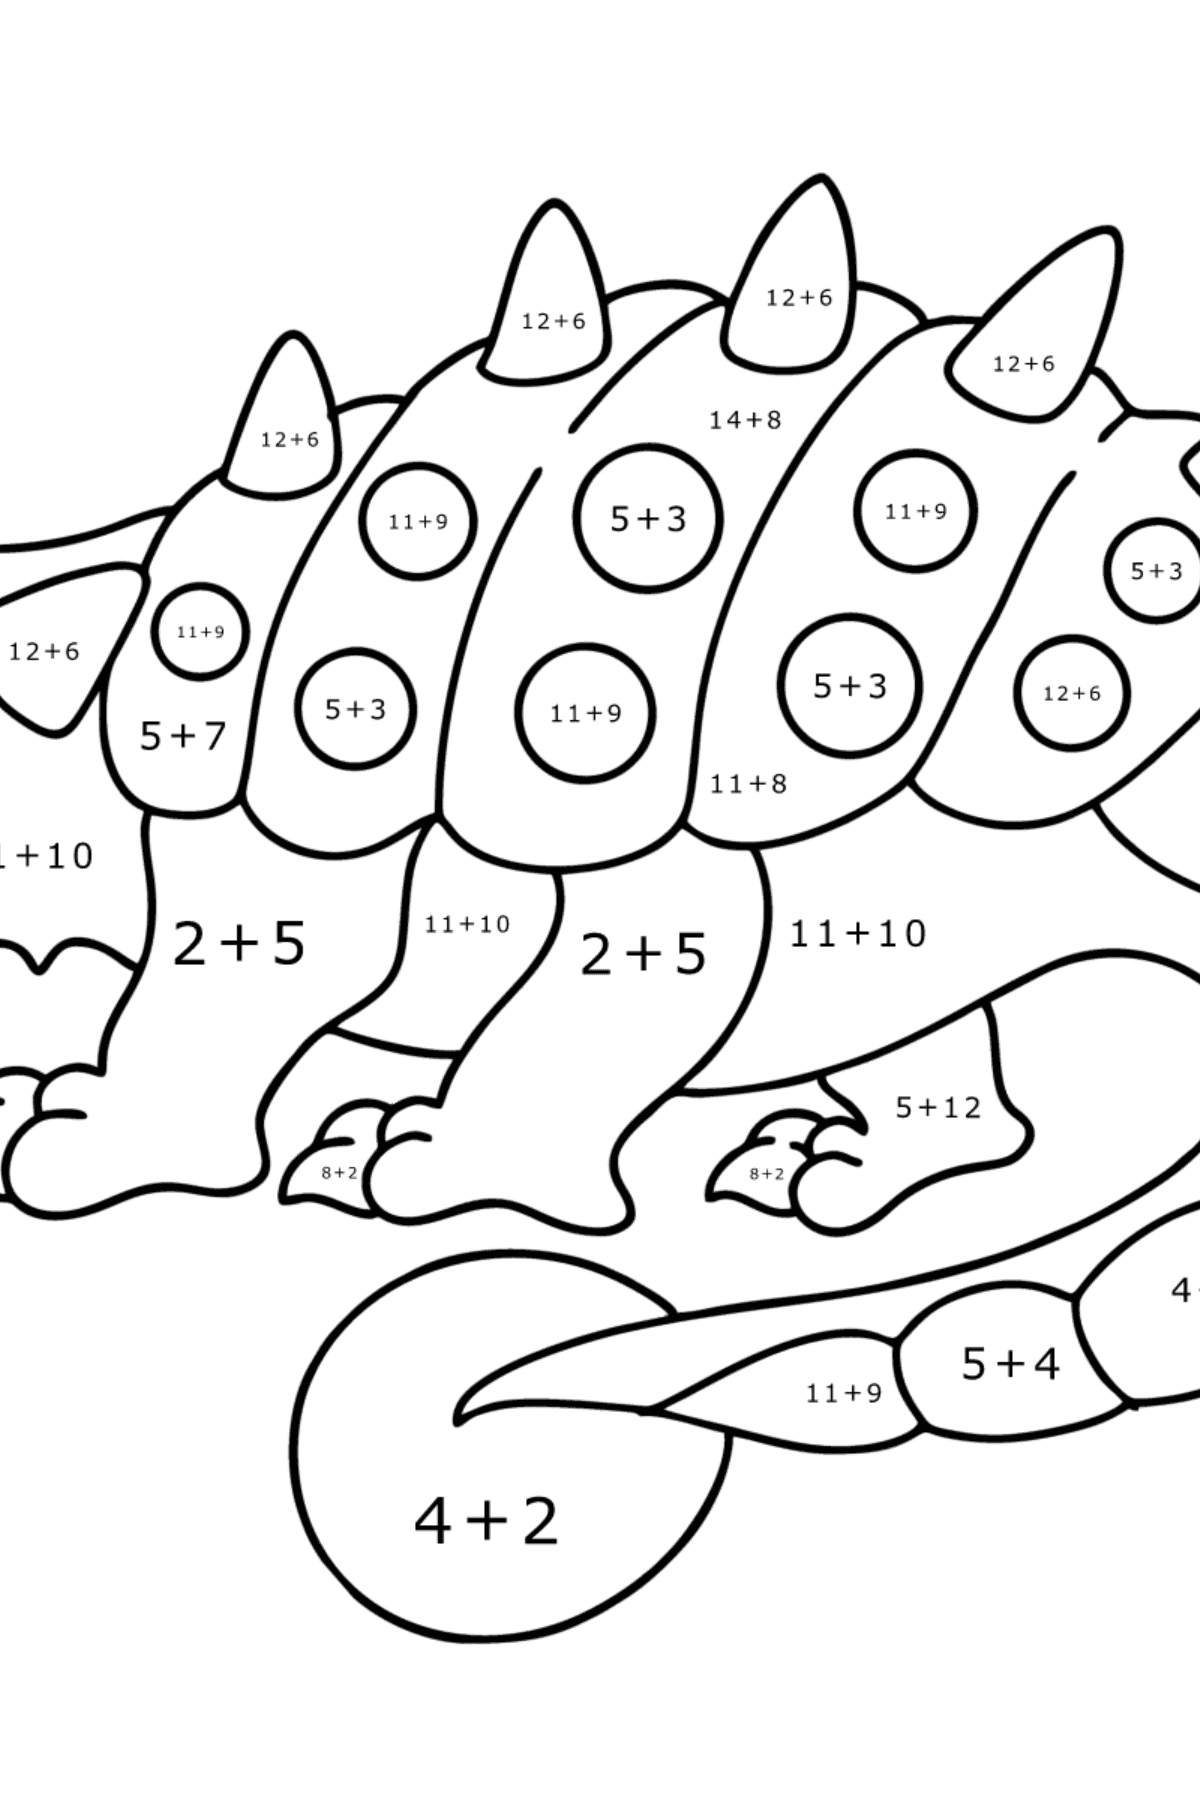 Ankylosaurus coloring page - Math Coloring - Addition for Kids